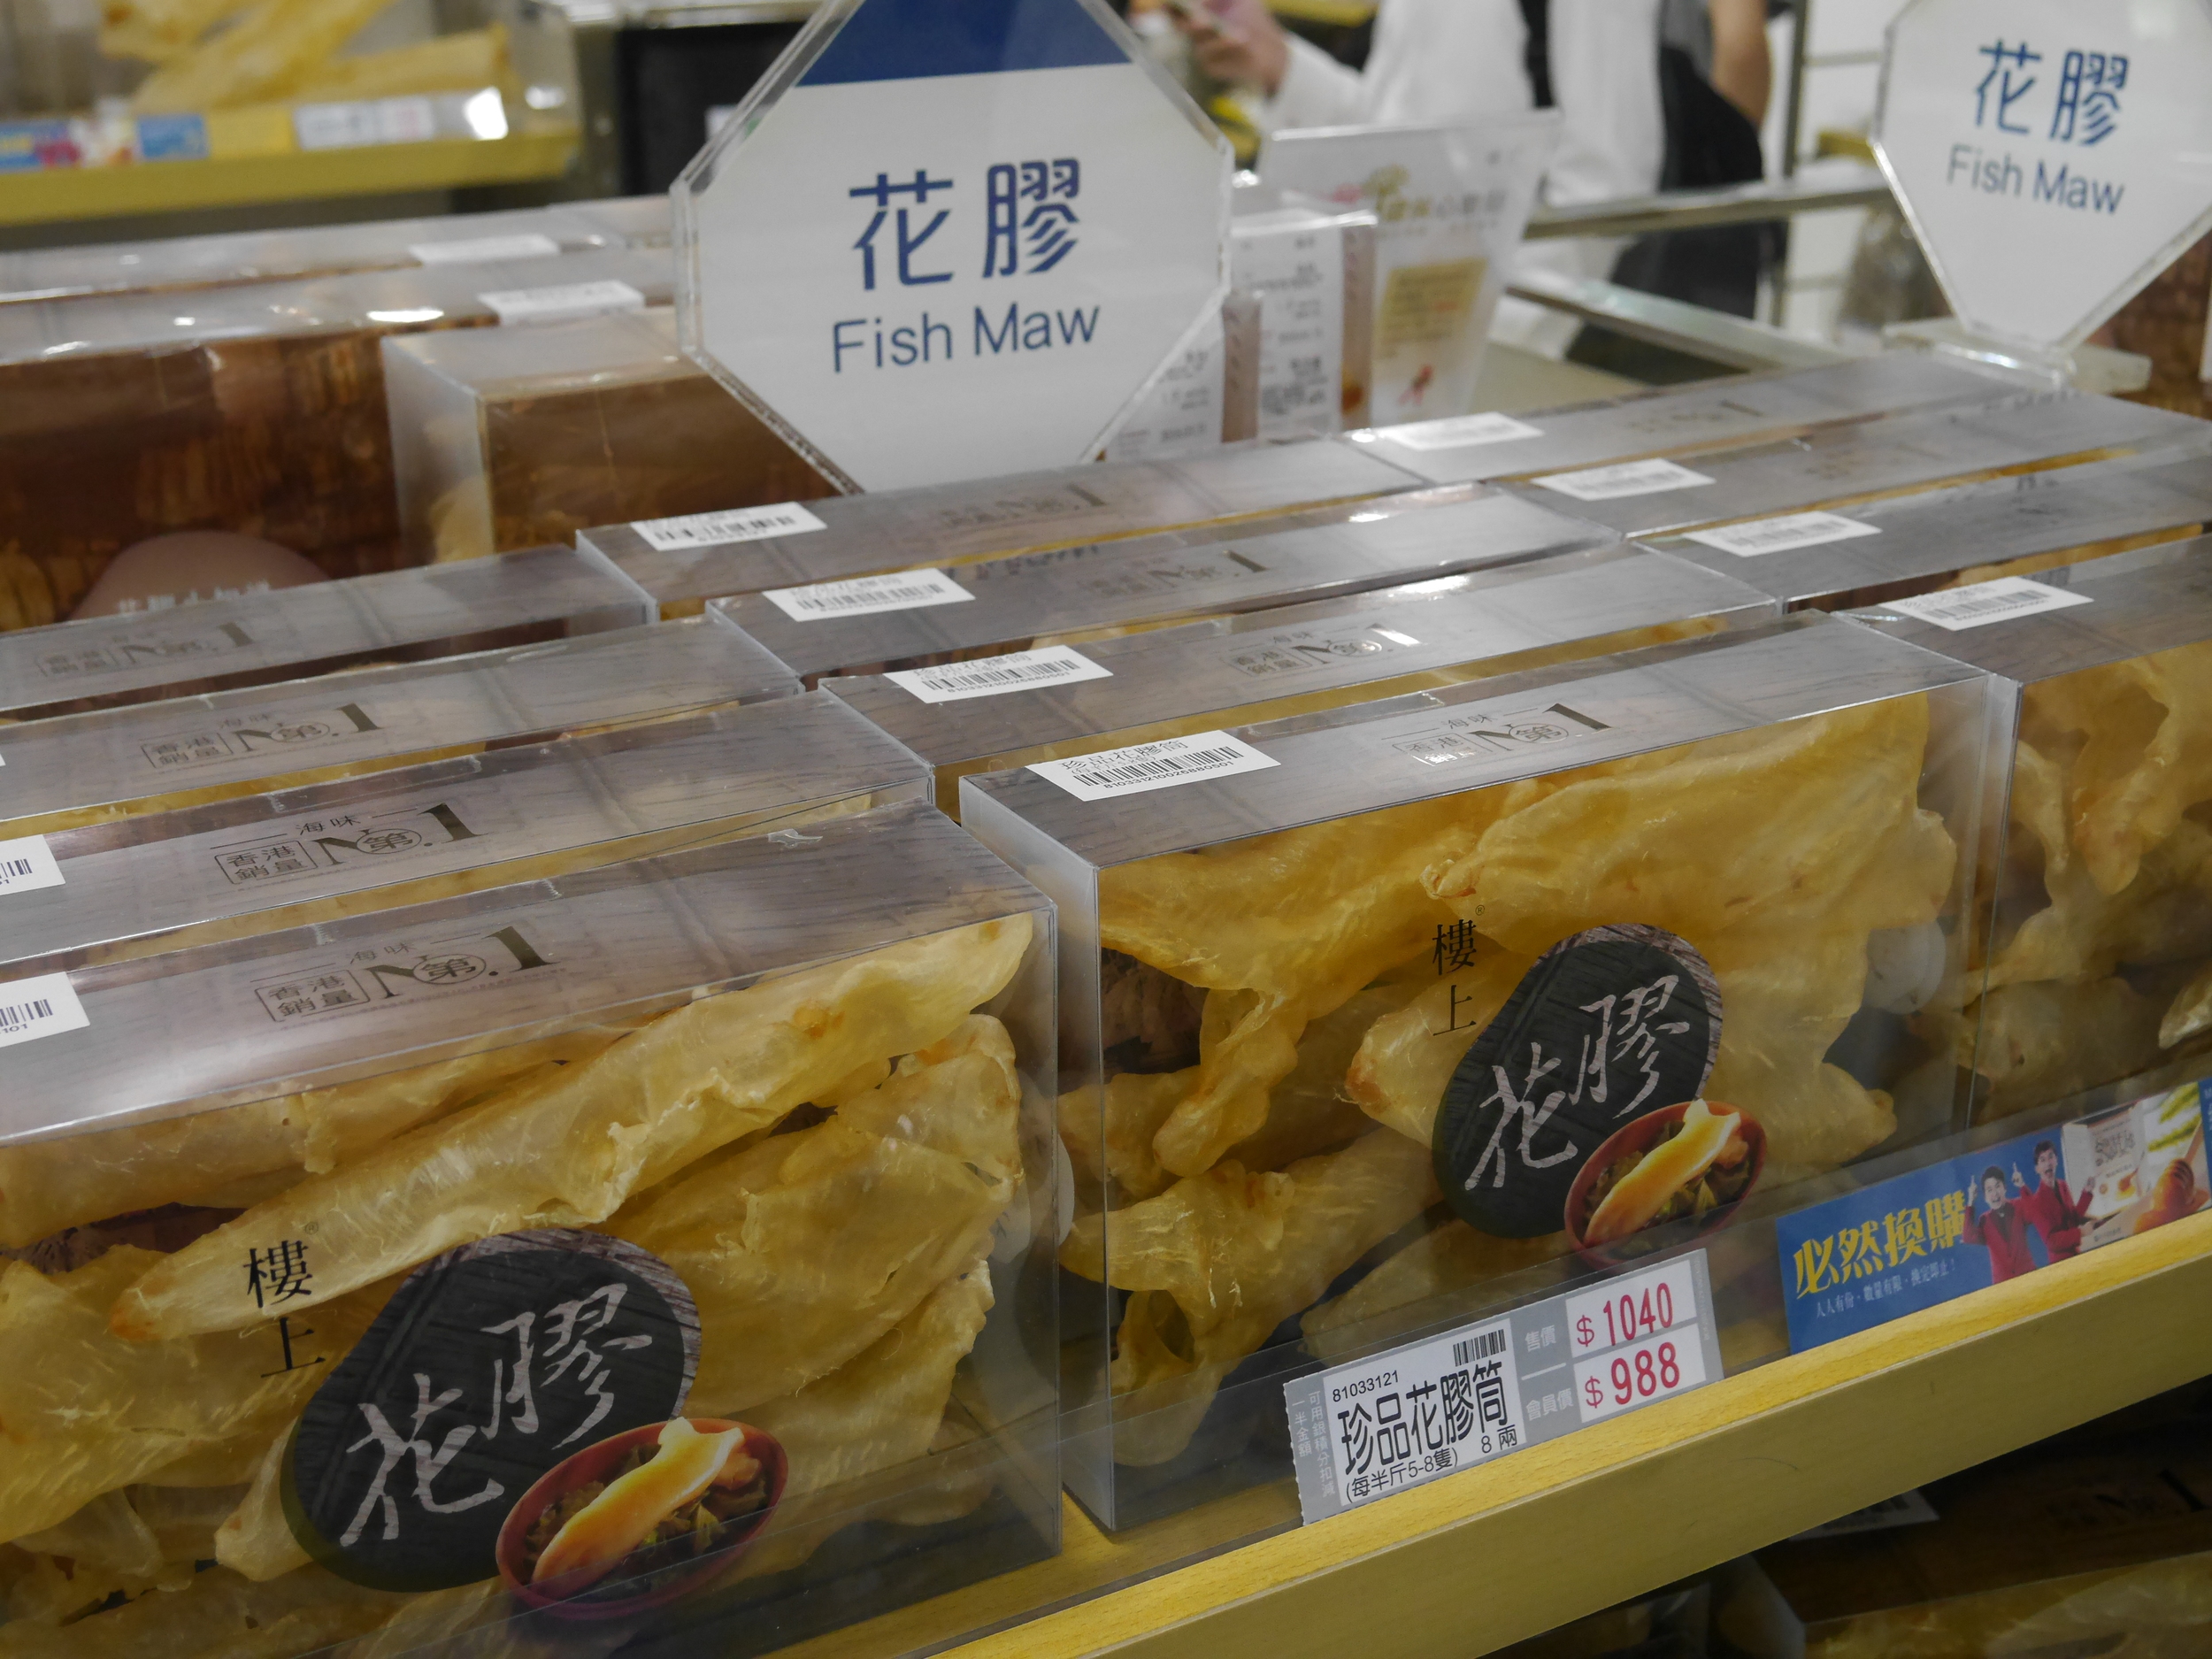  Fish maw (aka swim bladder). These are relatively small, so only around $135/box. 